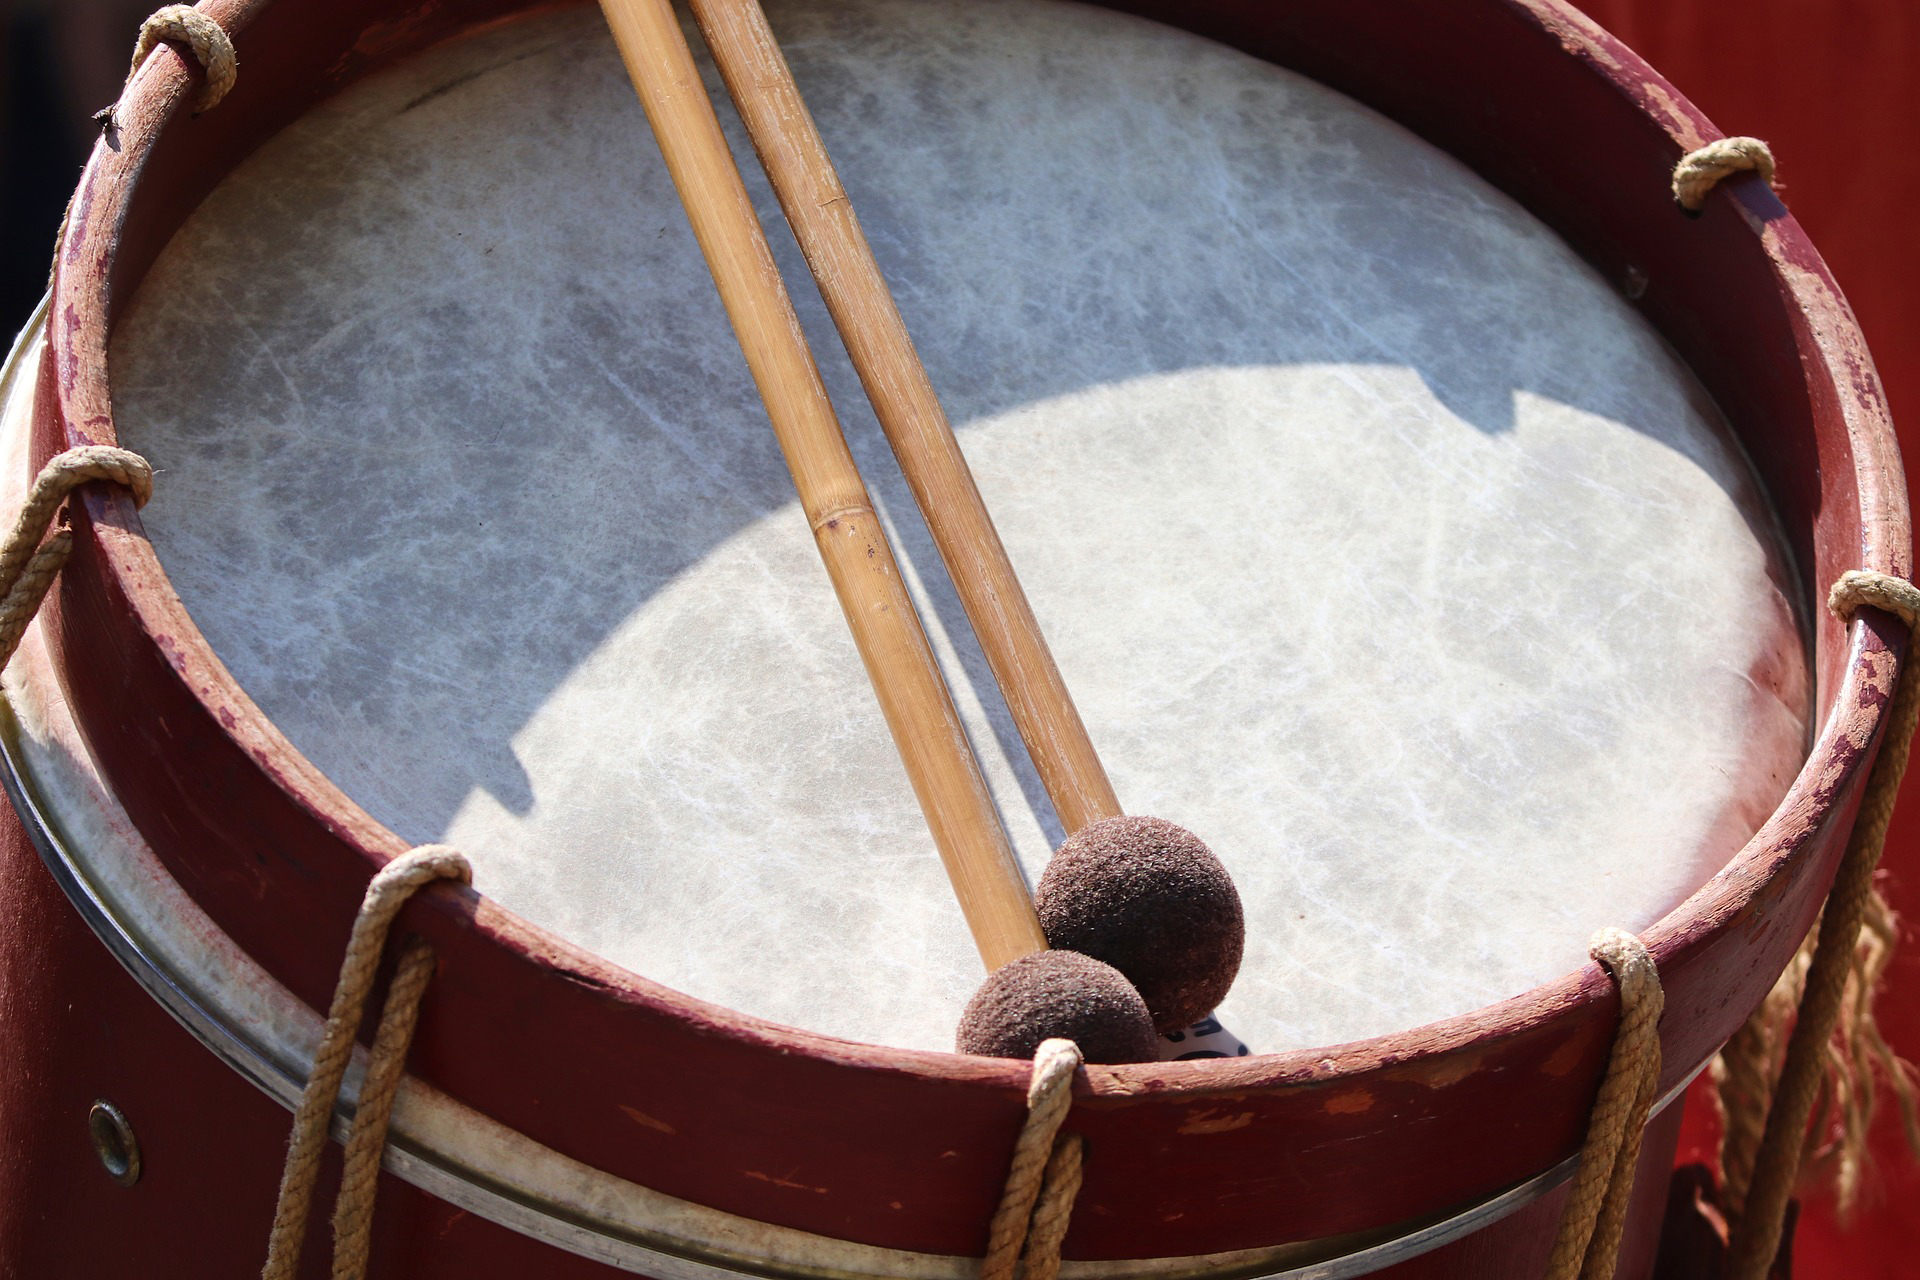 A close up of a drum head of a marching band tenor drum with two mallets resting on ots surface.